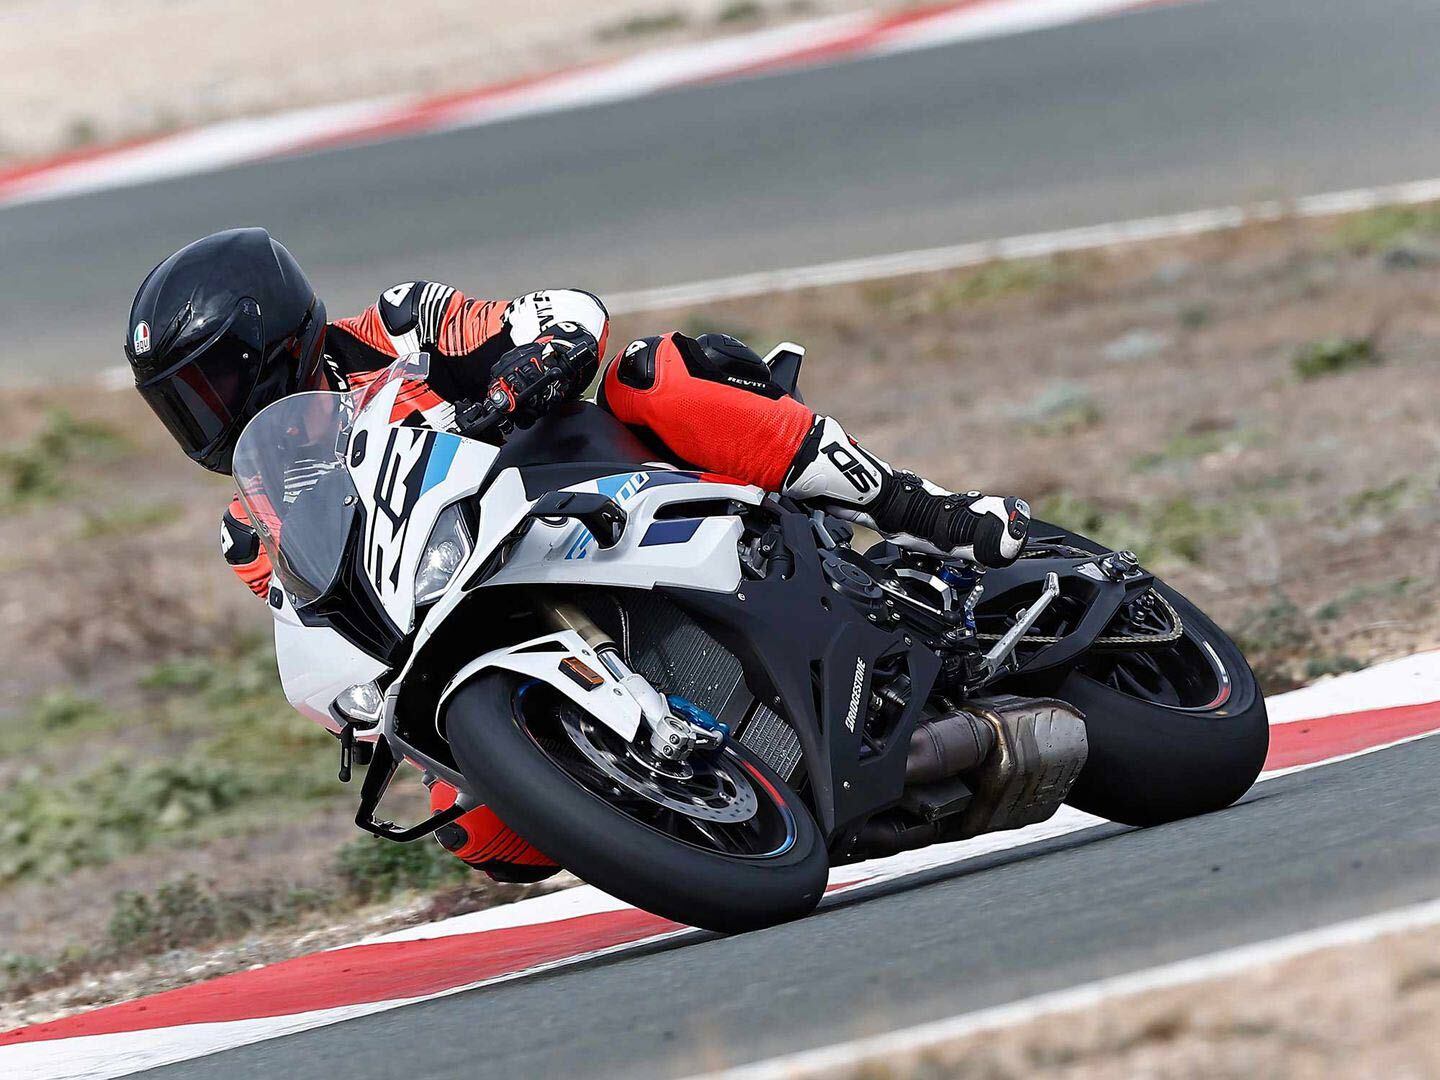 Despite its incredible performance, the S 1000 RR is a surprisingly easy motorcycle to hustle around a racetrack.